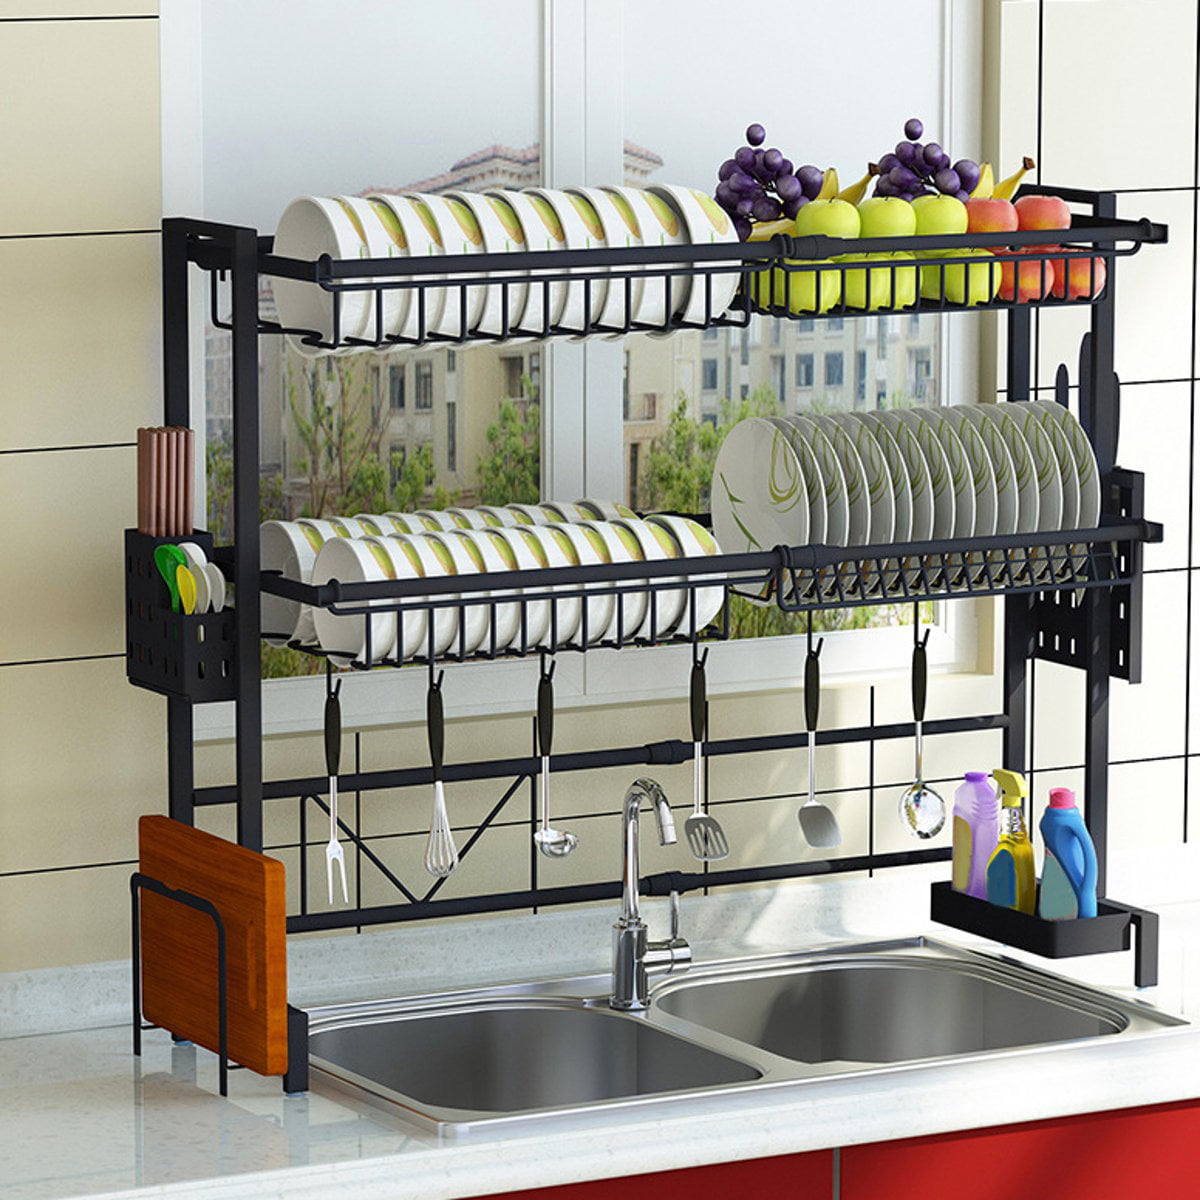 Details about   Stainless Steel Sink Drain Rack Kitchen Shelf Dish Cutlery Drying Drainer Holder 